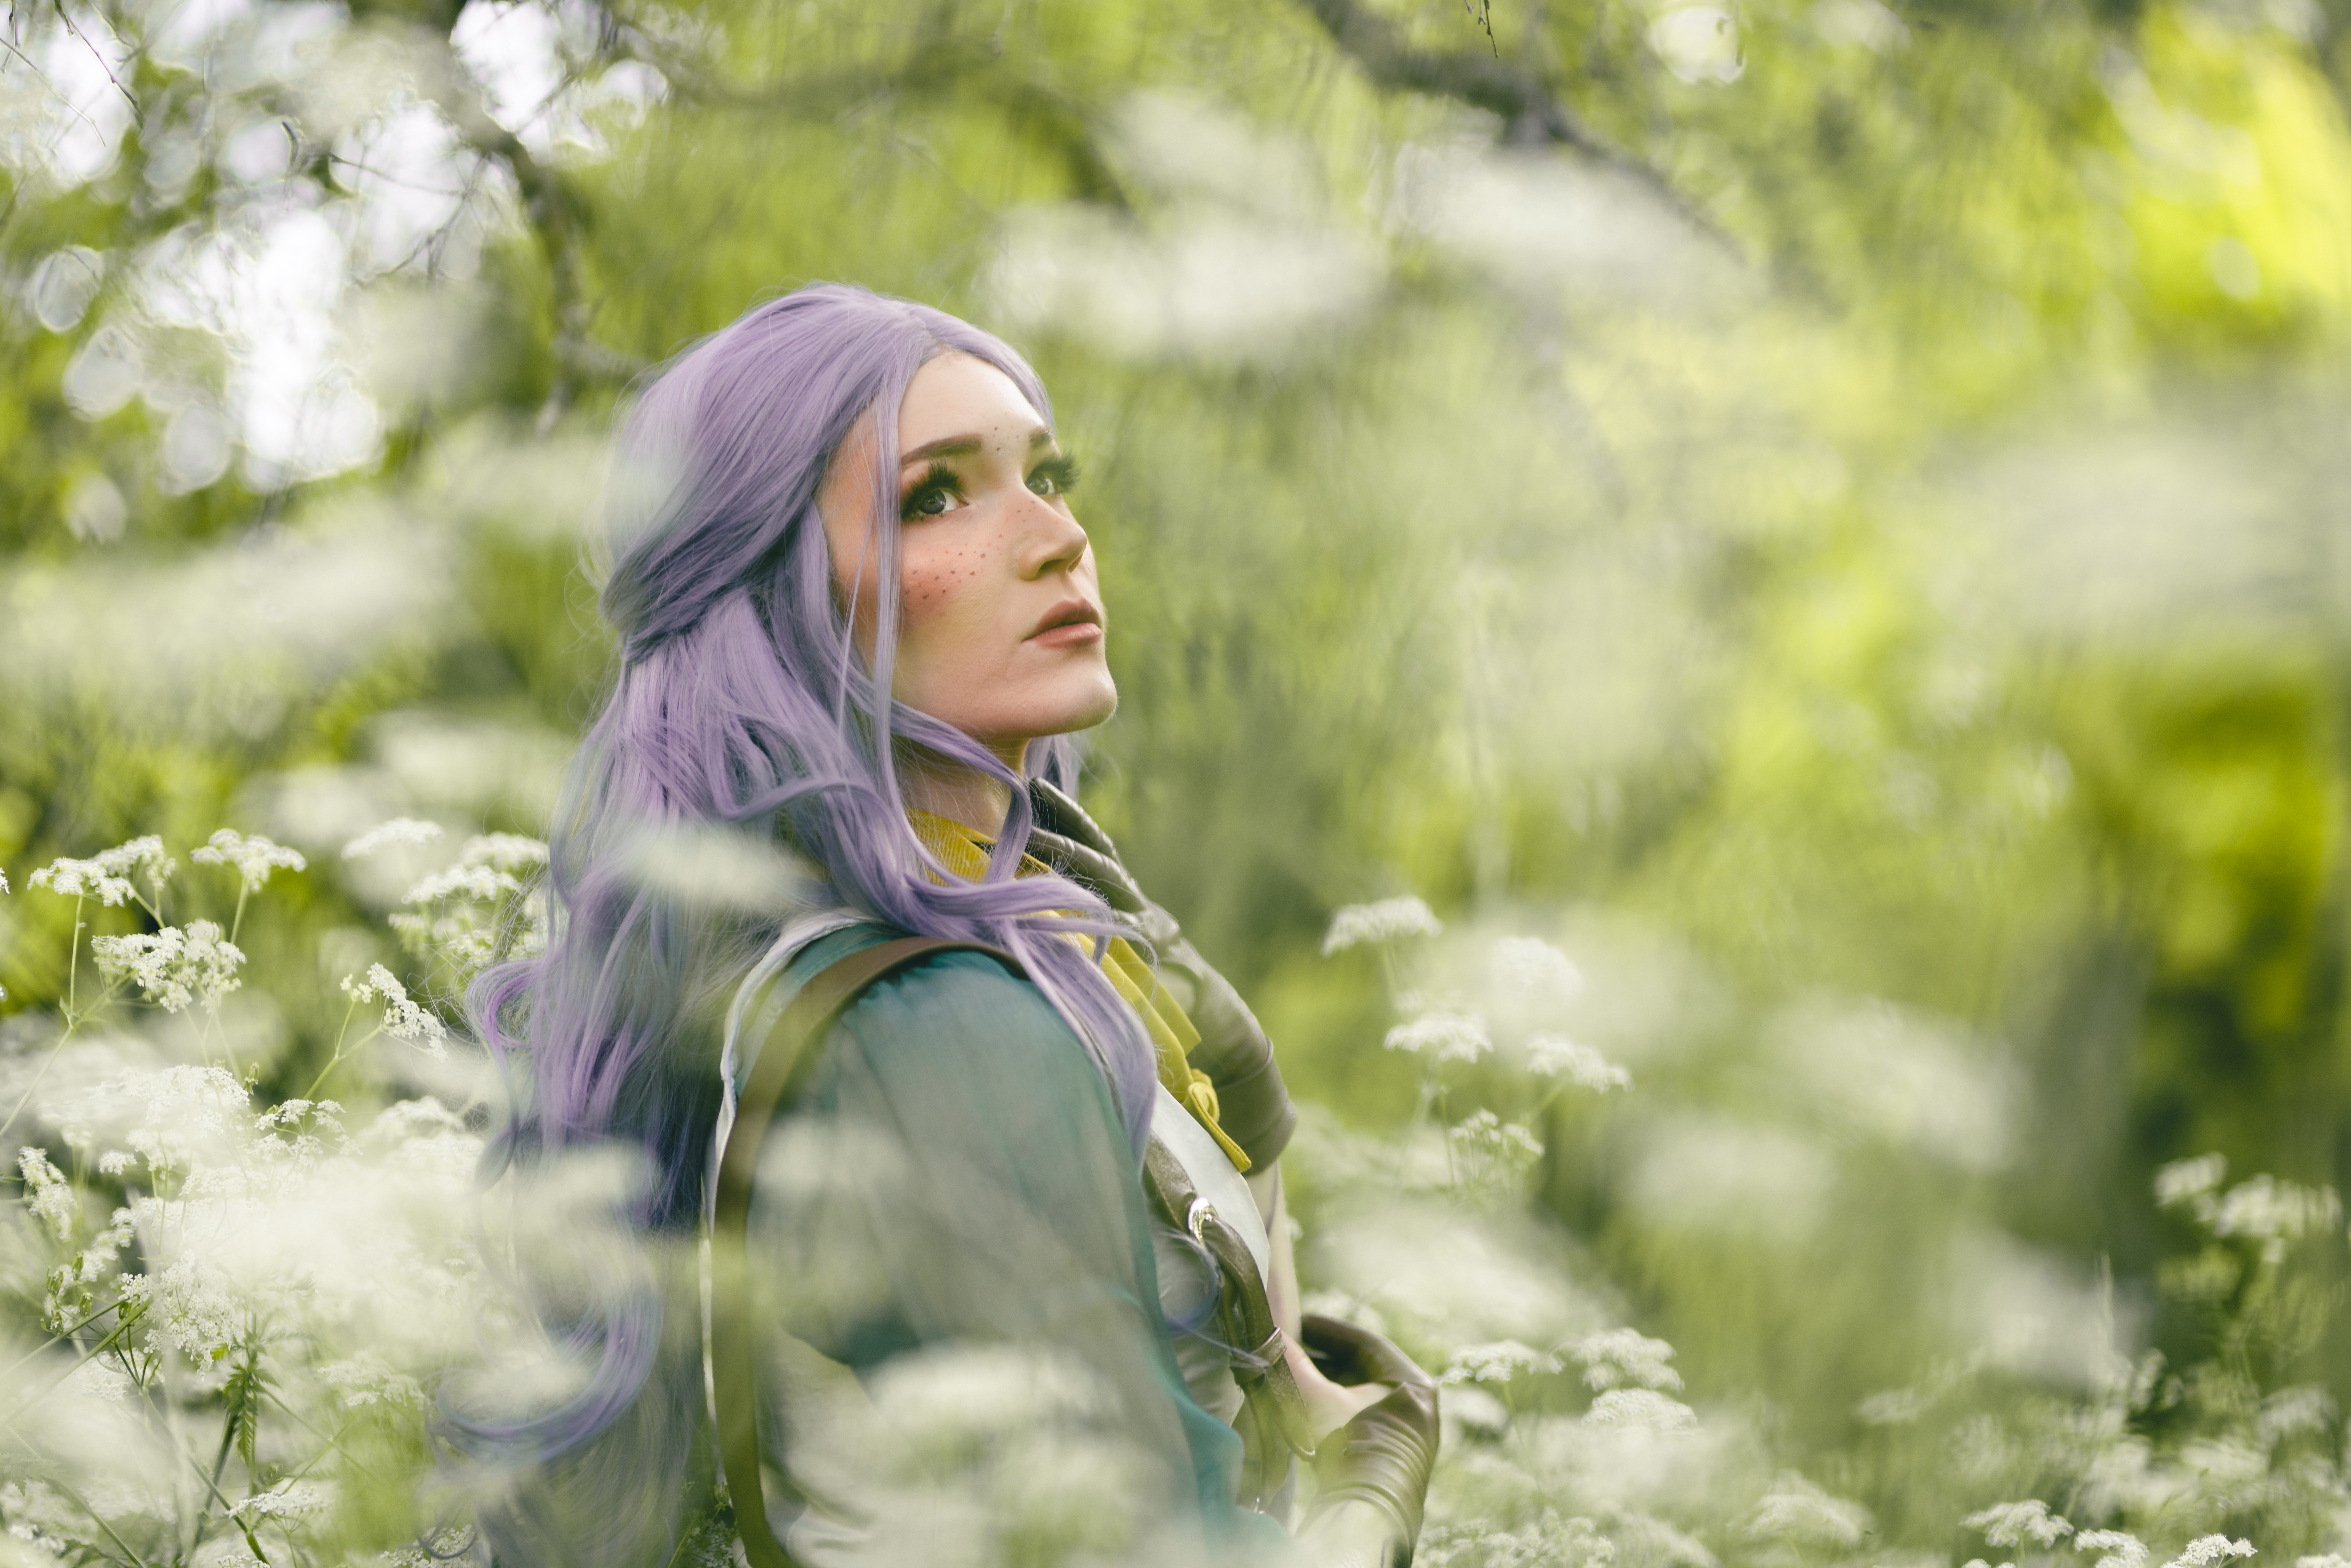 Cosplay Shoot with SurineCosplay as Imogen Temult from Critical Role